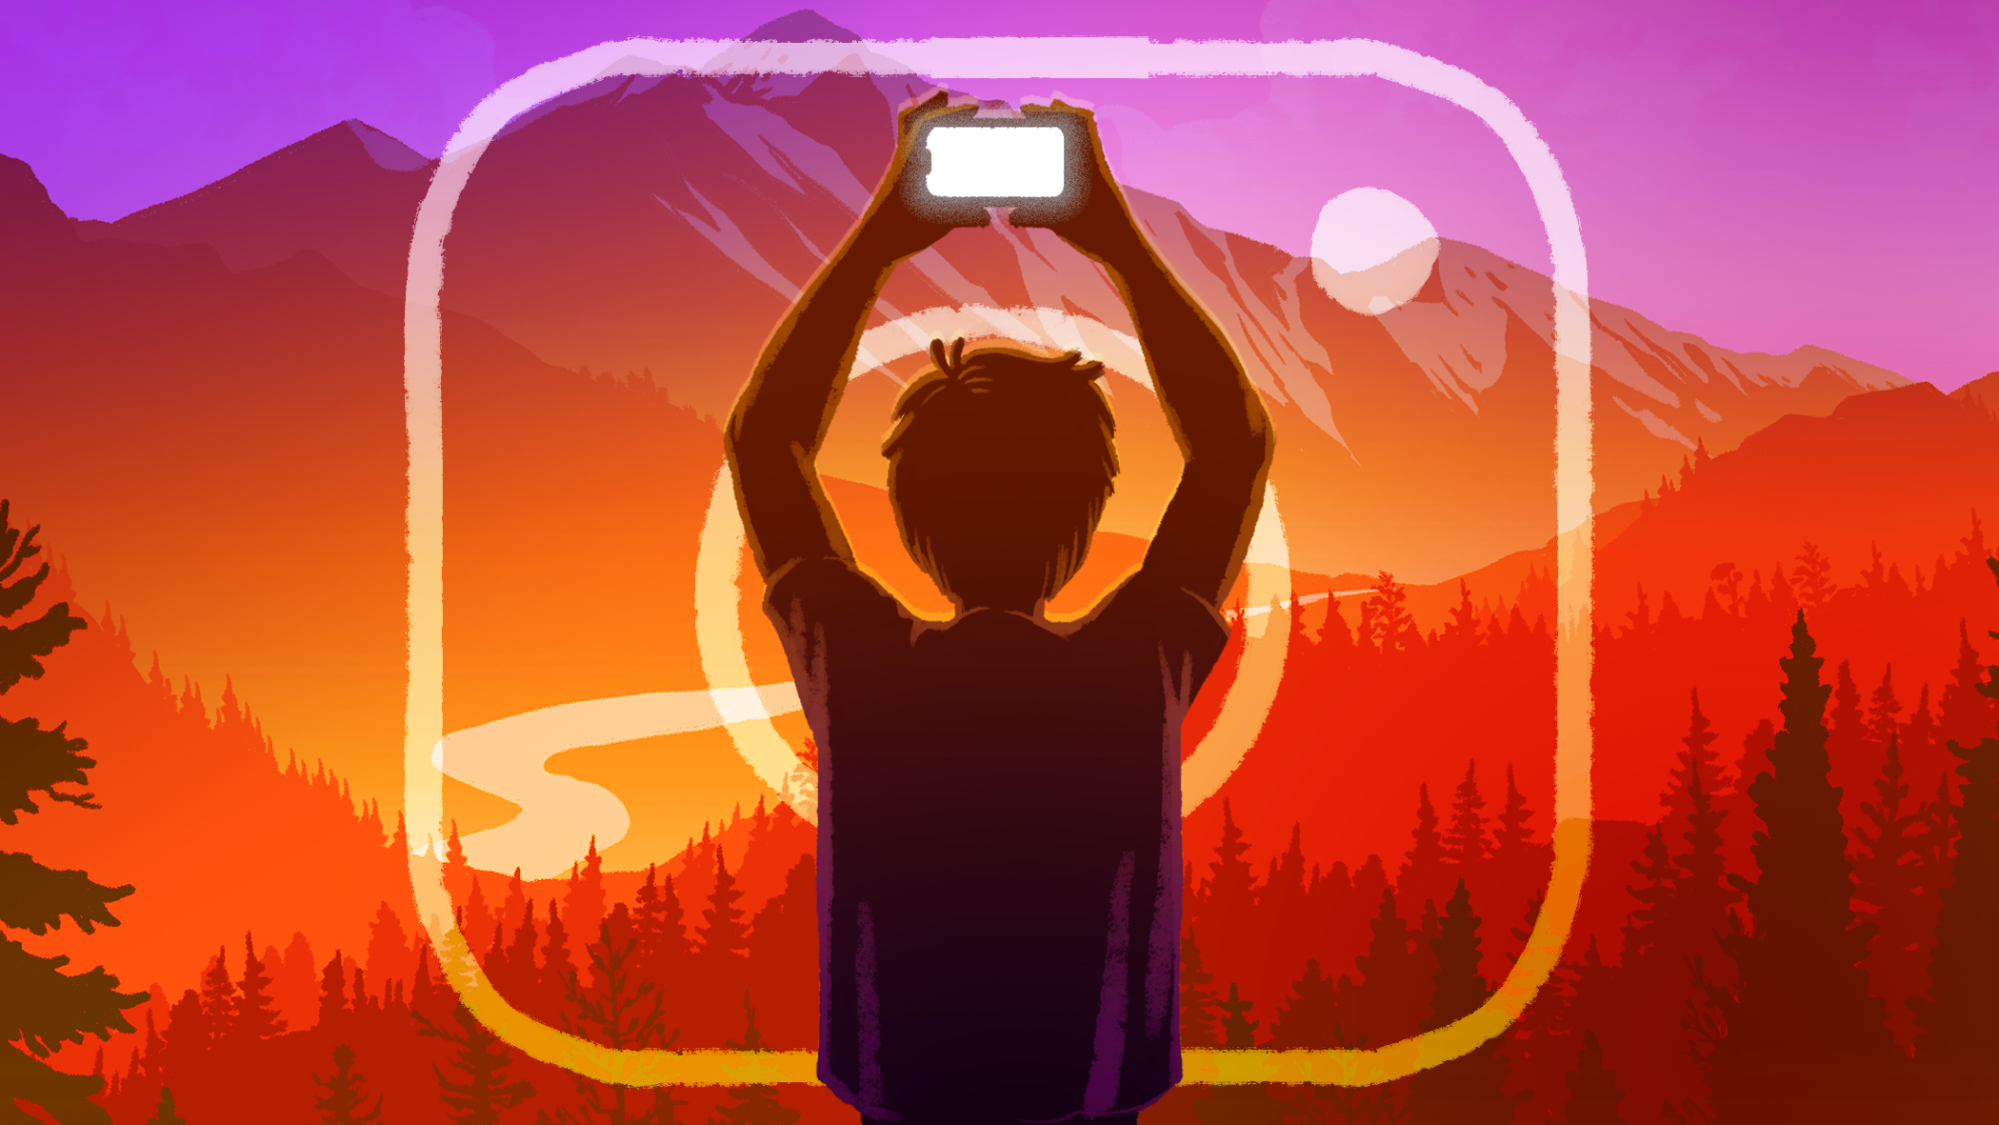 An illustration of a hiker holding up their phone to photograph a mountain.